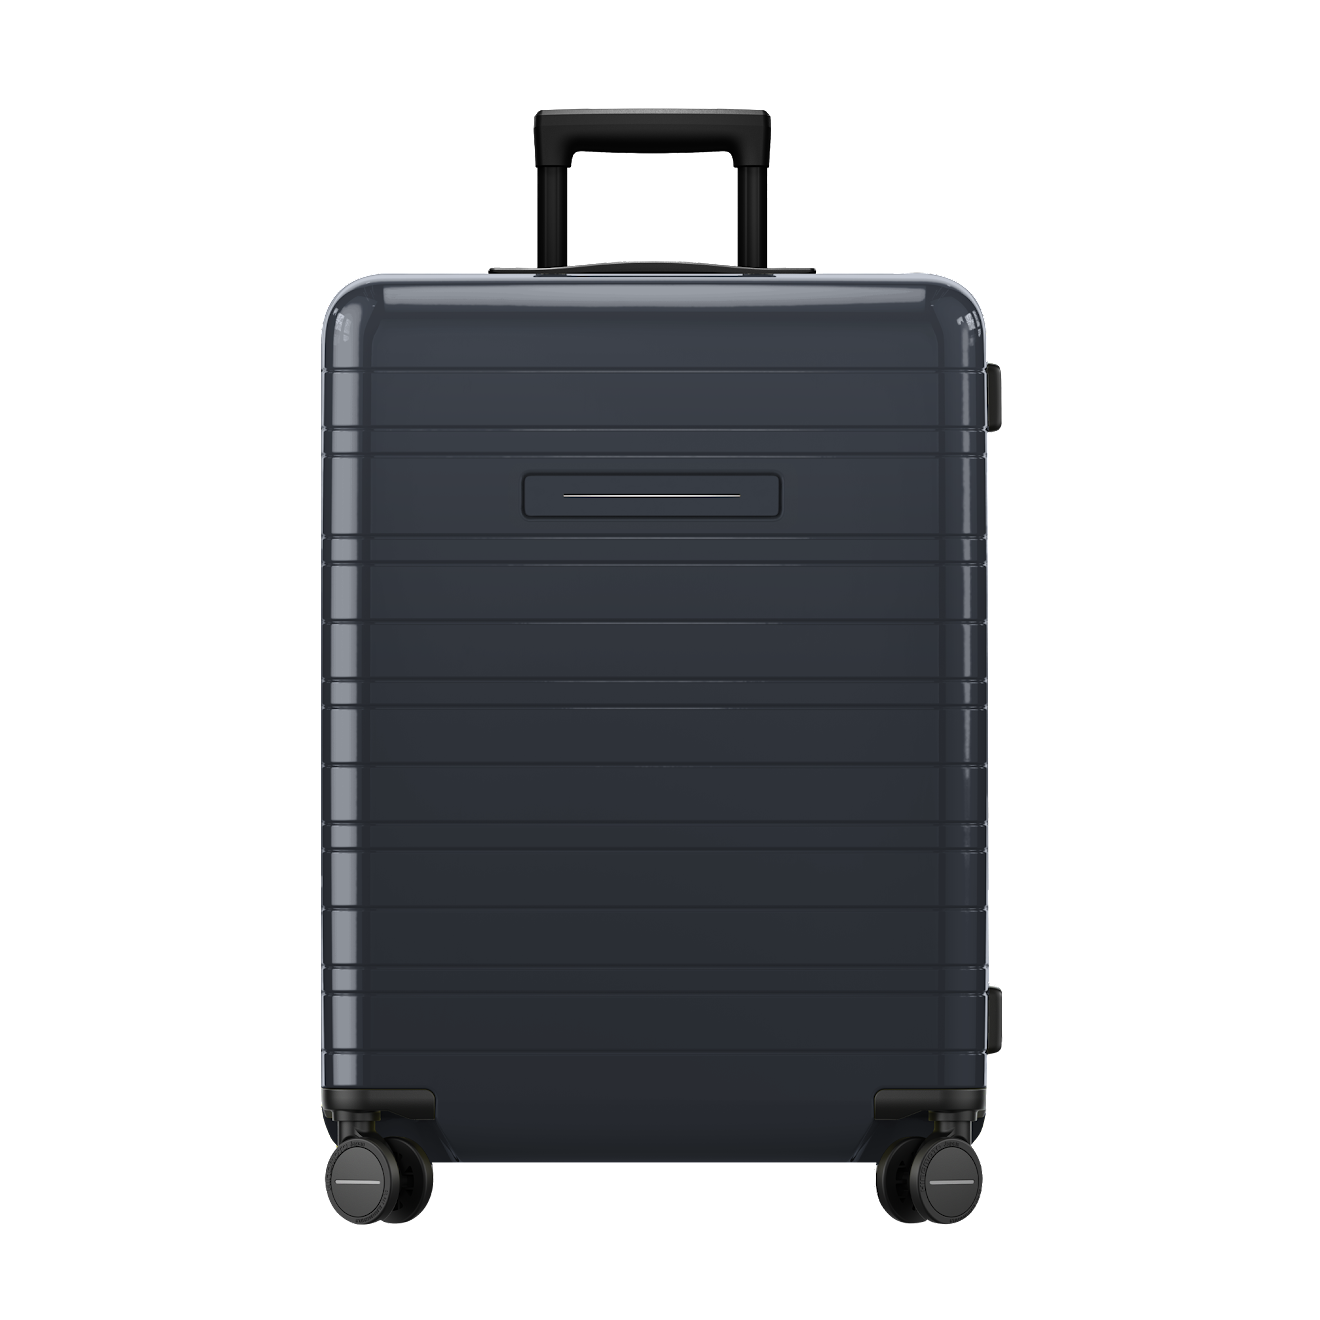 Horizn luggage Check-In Luggage (61L)